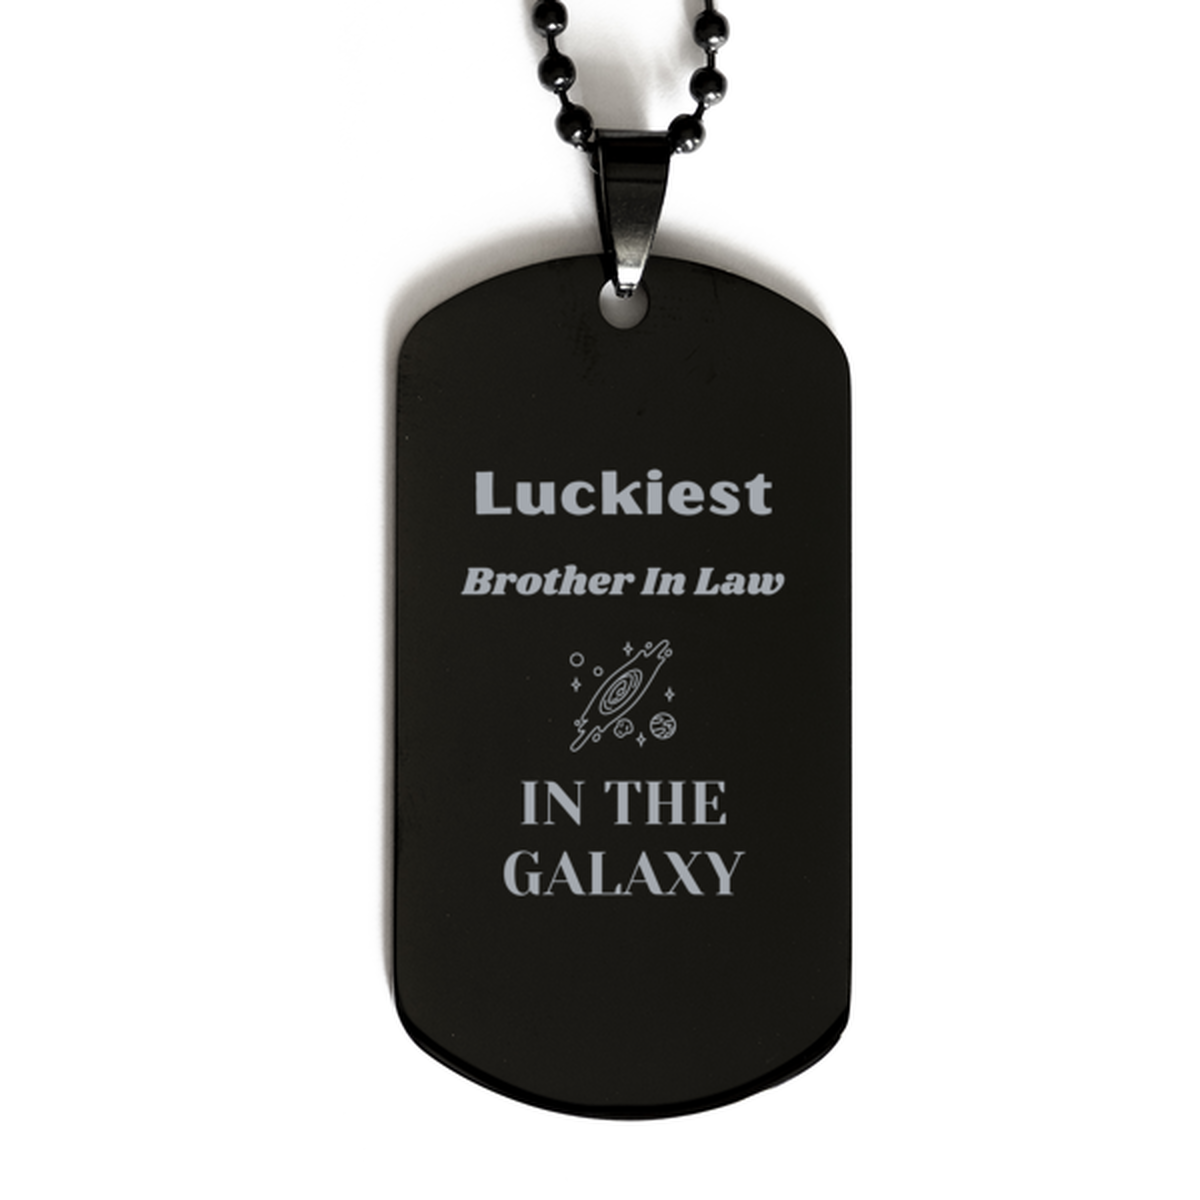 Luckiest Brother In Law in the Galaxy, To My Brother In Law Engraved Gifts, Christmas Brother In Law Black Dog Tag Gifts, X-mas Birthday Unique Gifts For Brother In Law Men Women